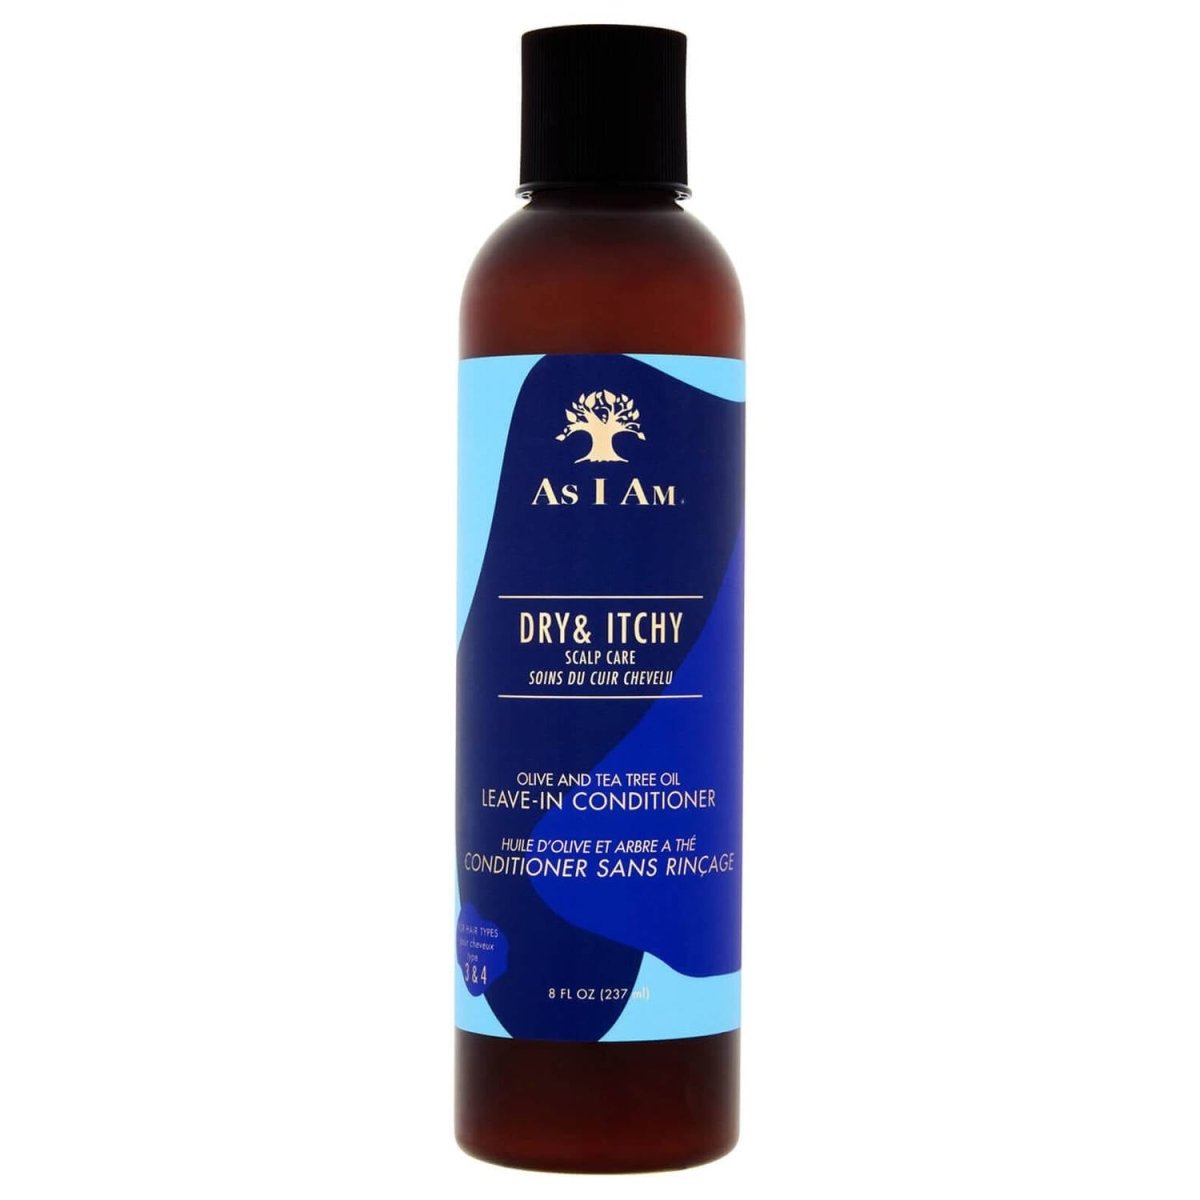 As I Am Dry and Itchy Scalp Care Olive and Tea Tree Oil Leave in Conditioner 8oz - Southwestsix Cosmetics As I Am Dry and Itchy Scalp Care Olive and Tea Tree Oil Leave in Conditioner 8oz Leave-in Conditioner As I Am Southwestsix Cosmetics As I Am Dry and Itchy Scalp Care Olive and Tea Tree Oil Leave in Conditioner 8oz